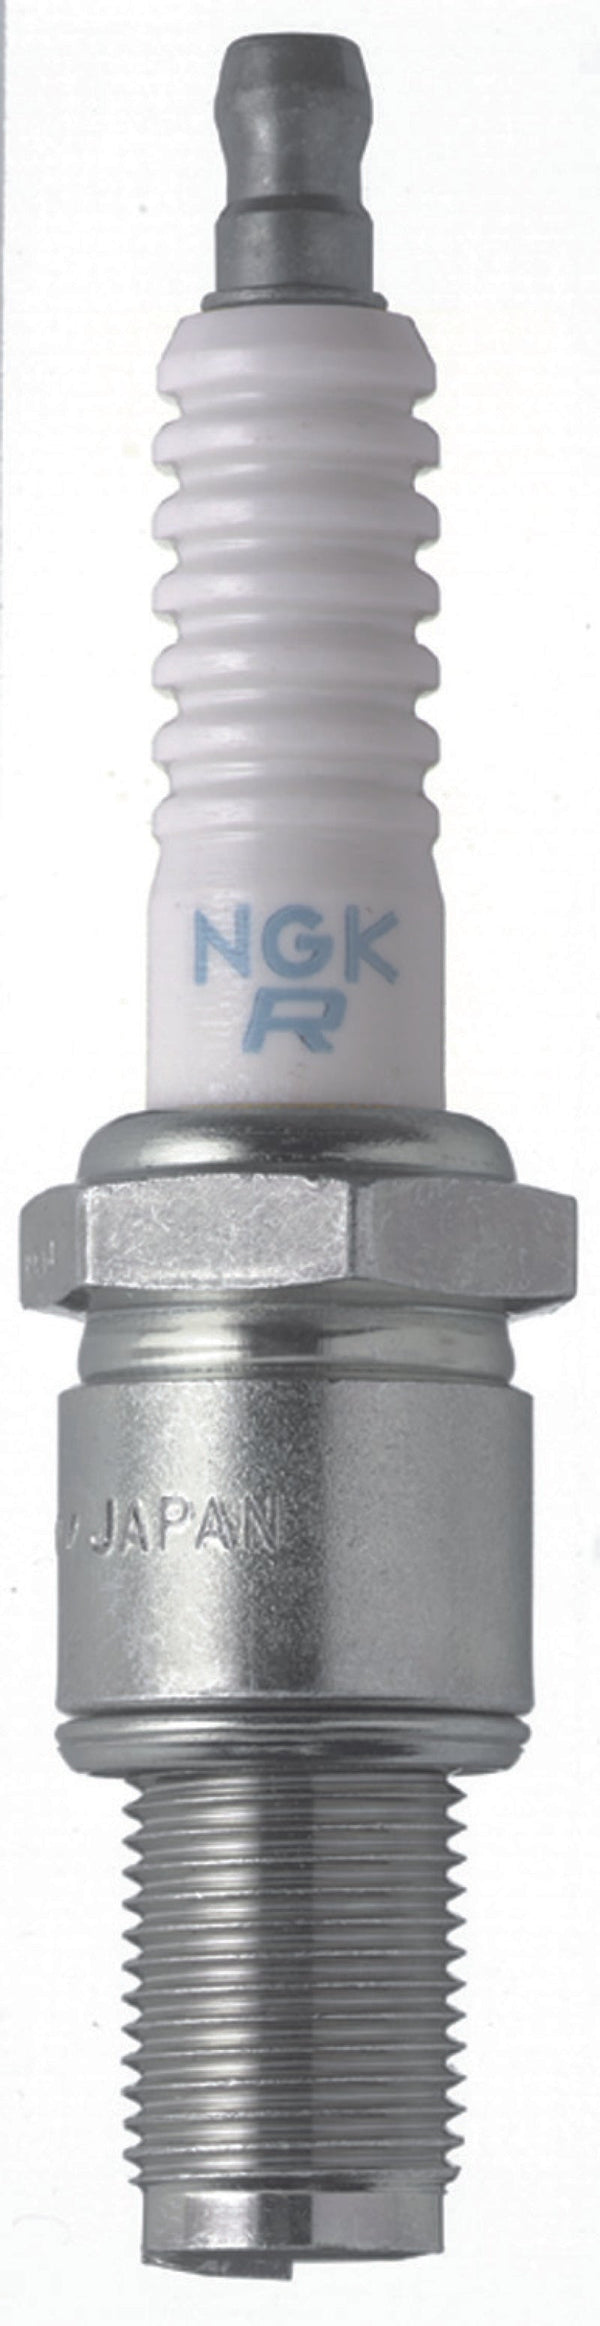 NGK Racing .5 Spark Plug Box of 4 (R6725-105) - Premium Spark Plugs from NGK - Just 643.44 SR! Shop now at Motors